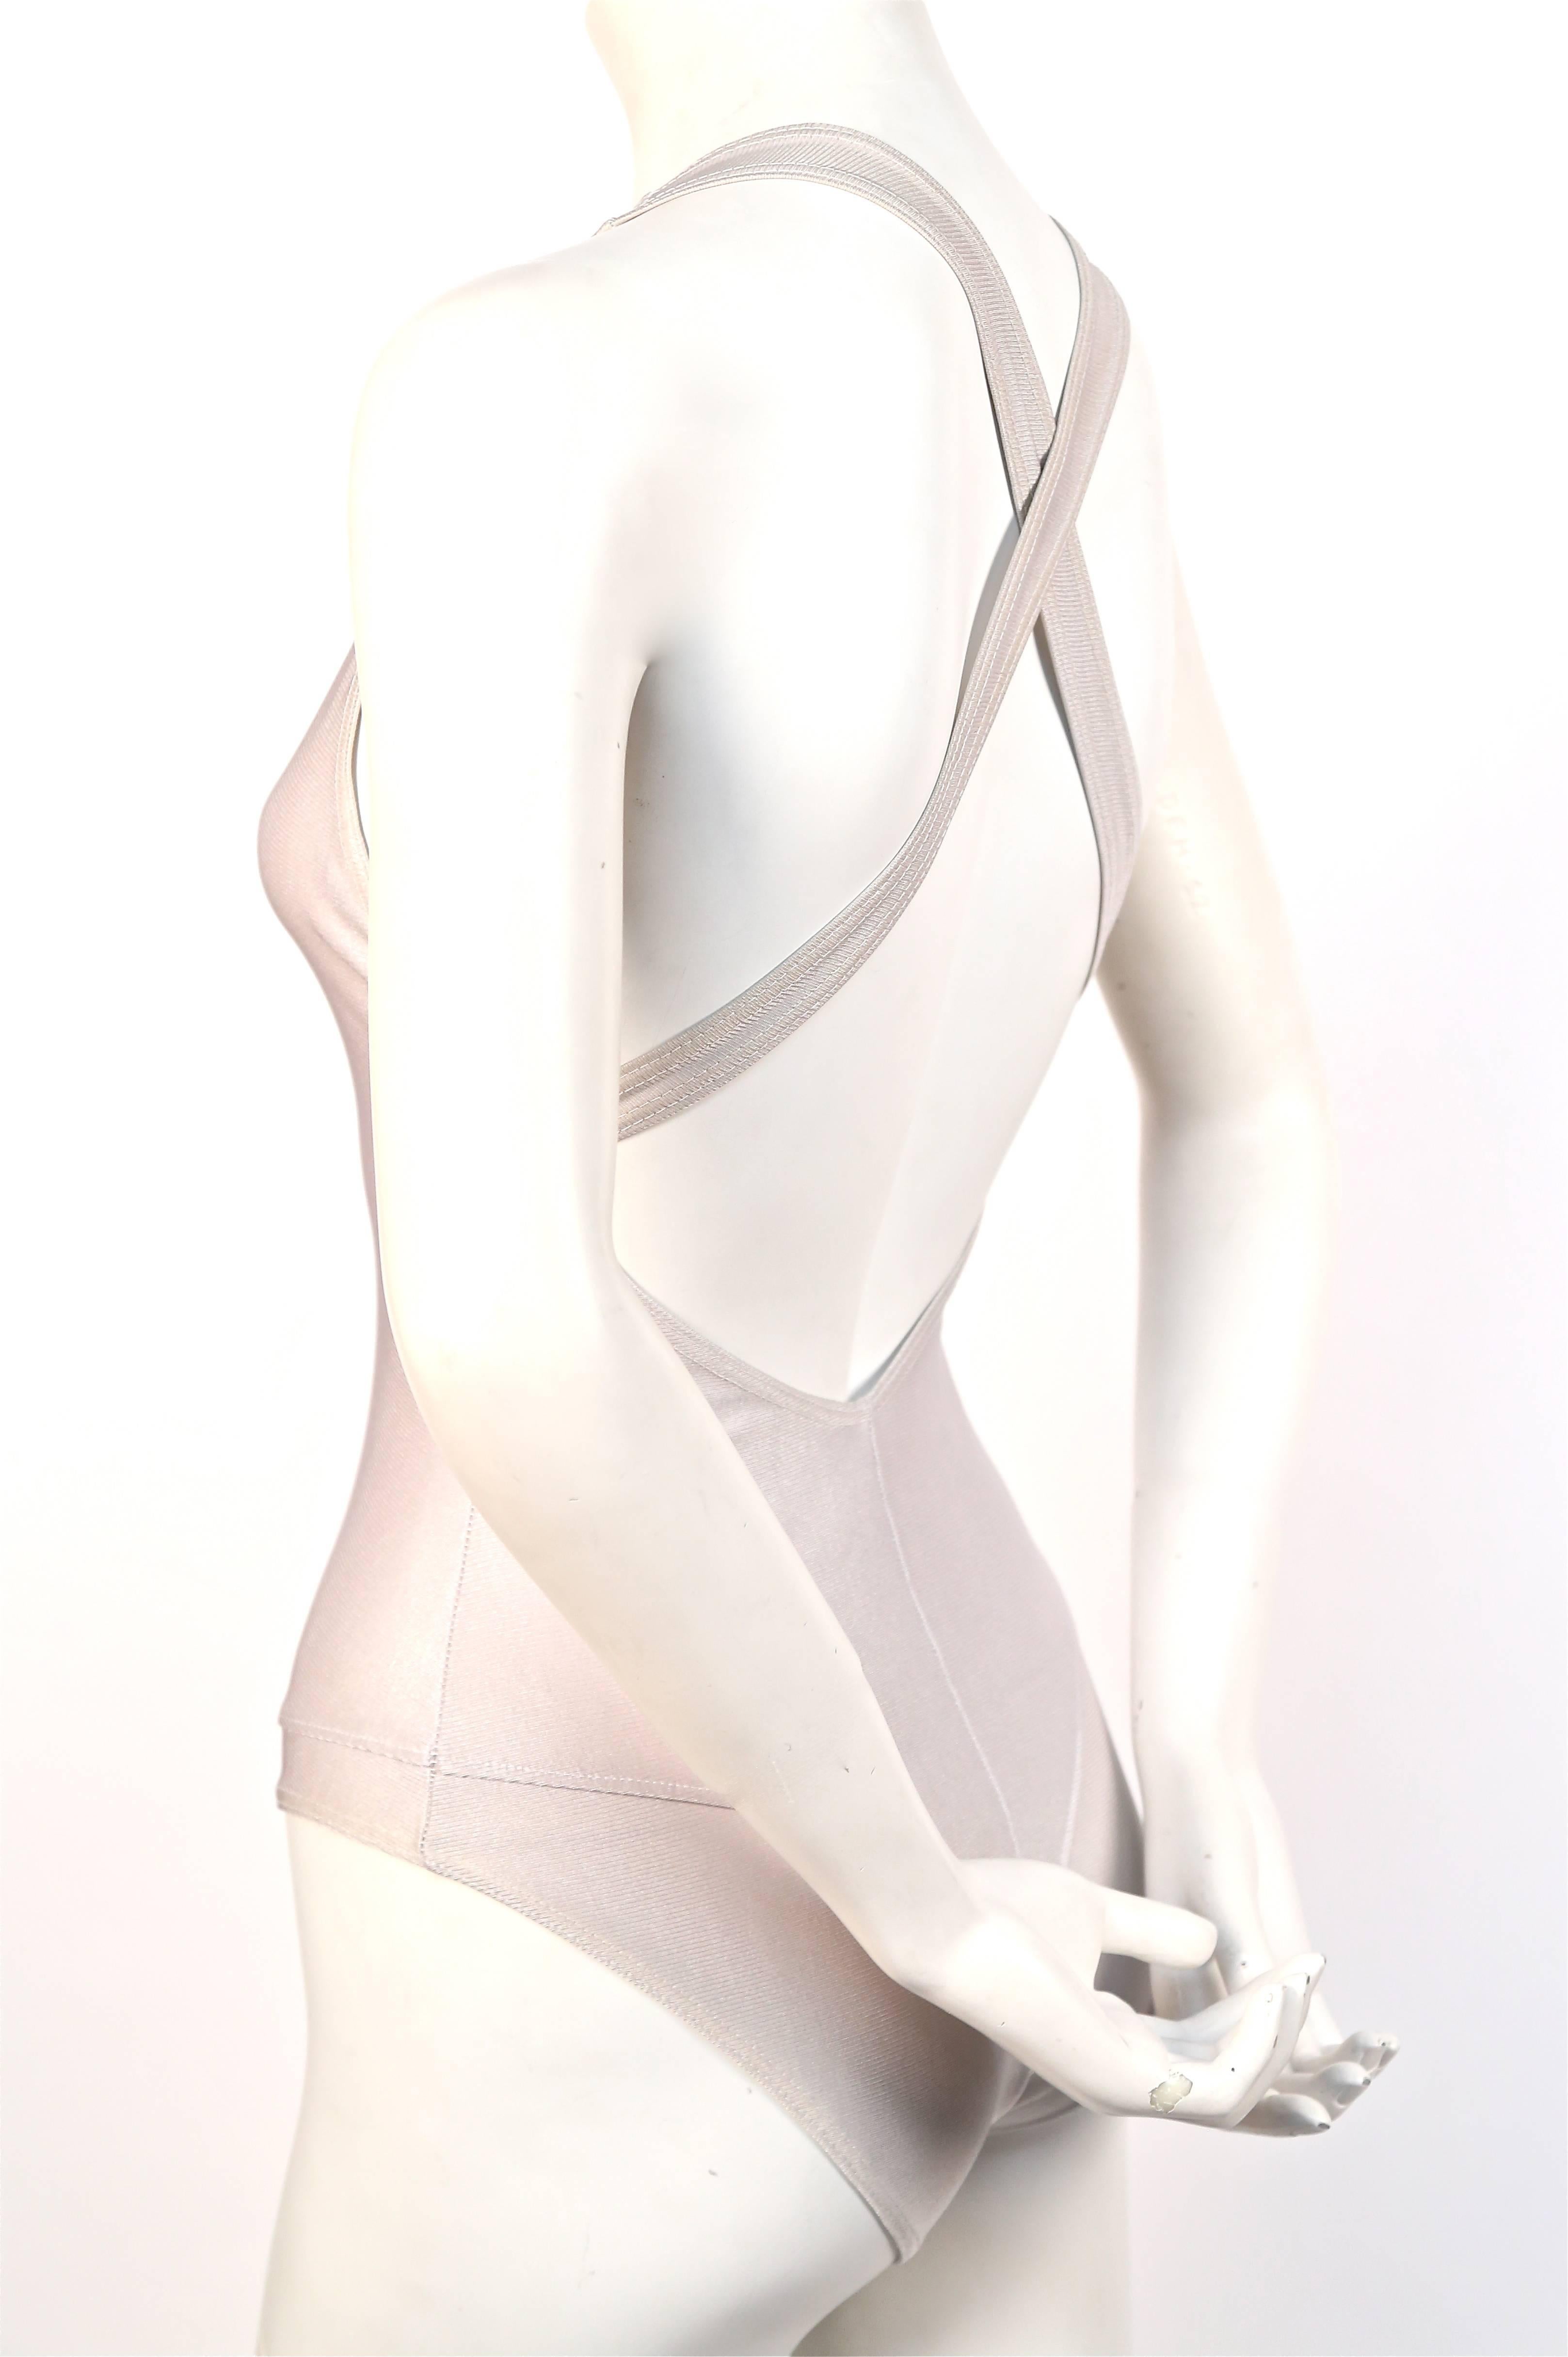 Very rare silver swimsuit with crossed back straps from Azzedine Alaia dating to the 1990's.  Labeled a 'M' (FR 38), however this swimsuit best fits a size S or XS (mannequin measures 32